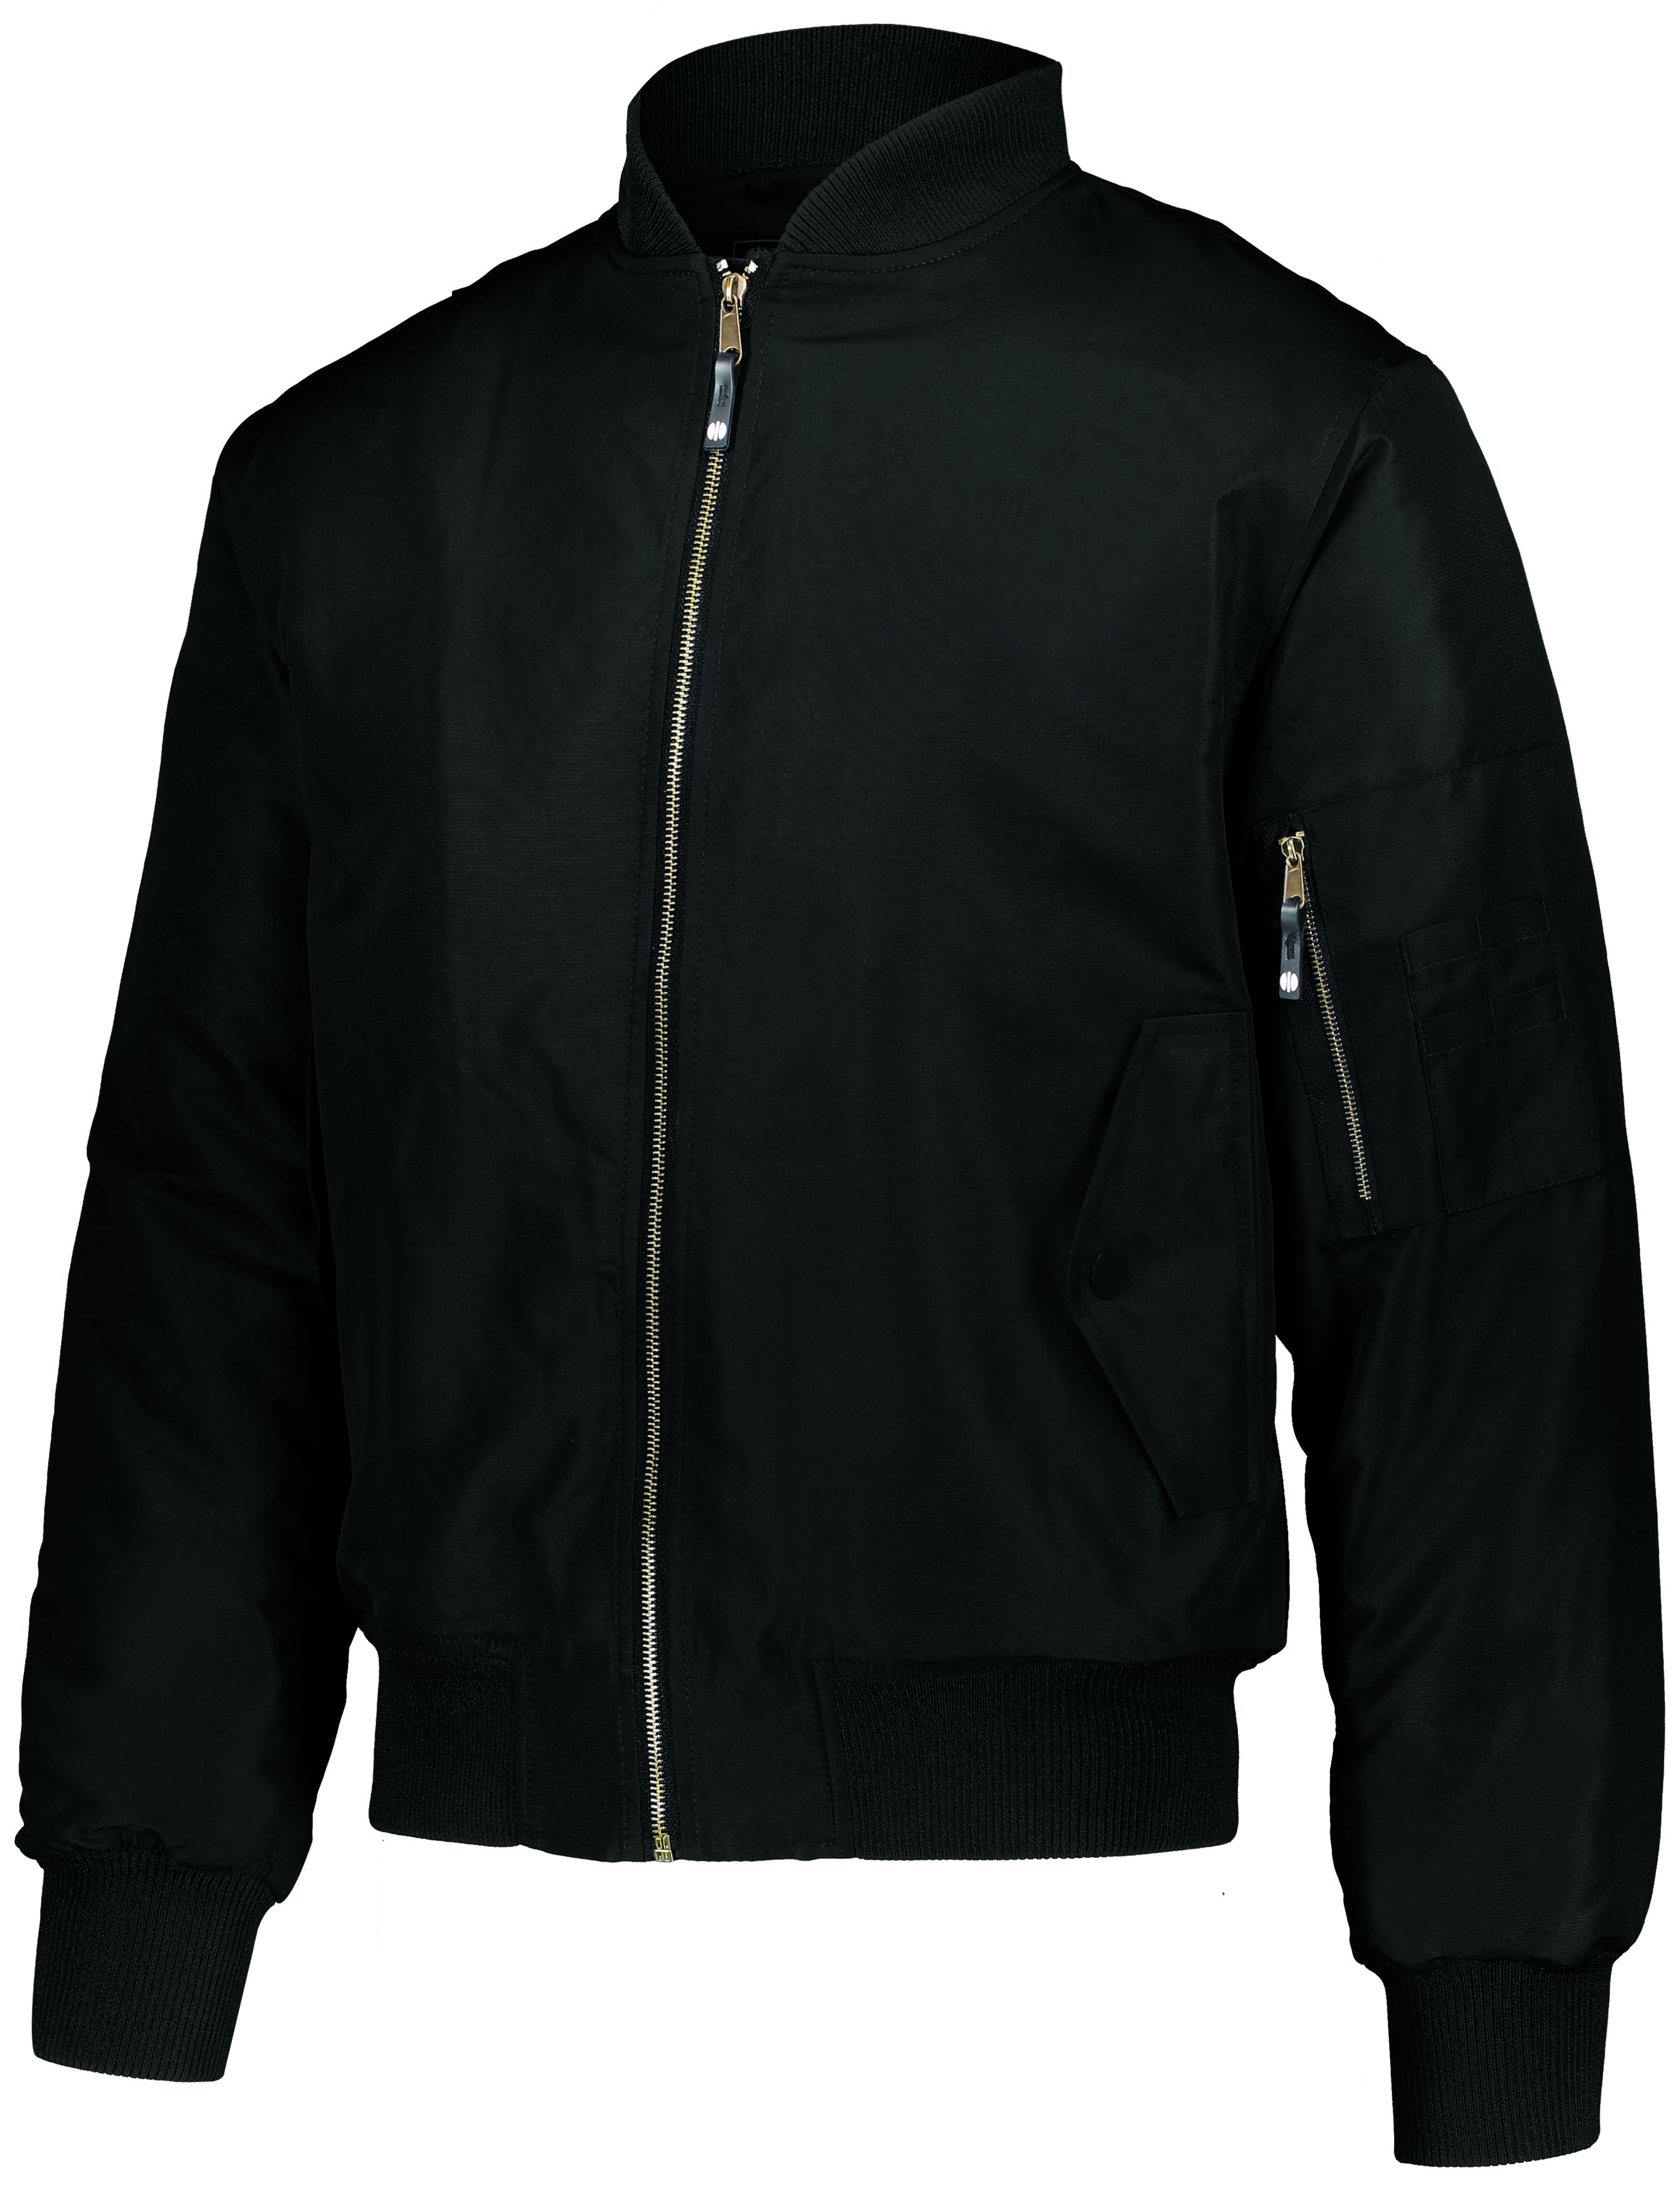 Holloway Flight Bomber Jacket in Black  -Part of the Adult, Adult-Jacket, Holloway, Outerwear product lines at KanaleyCreations.com